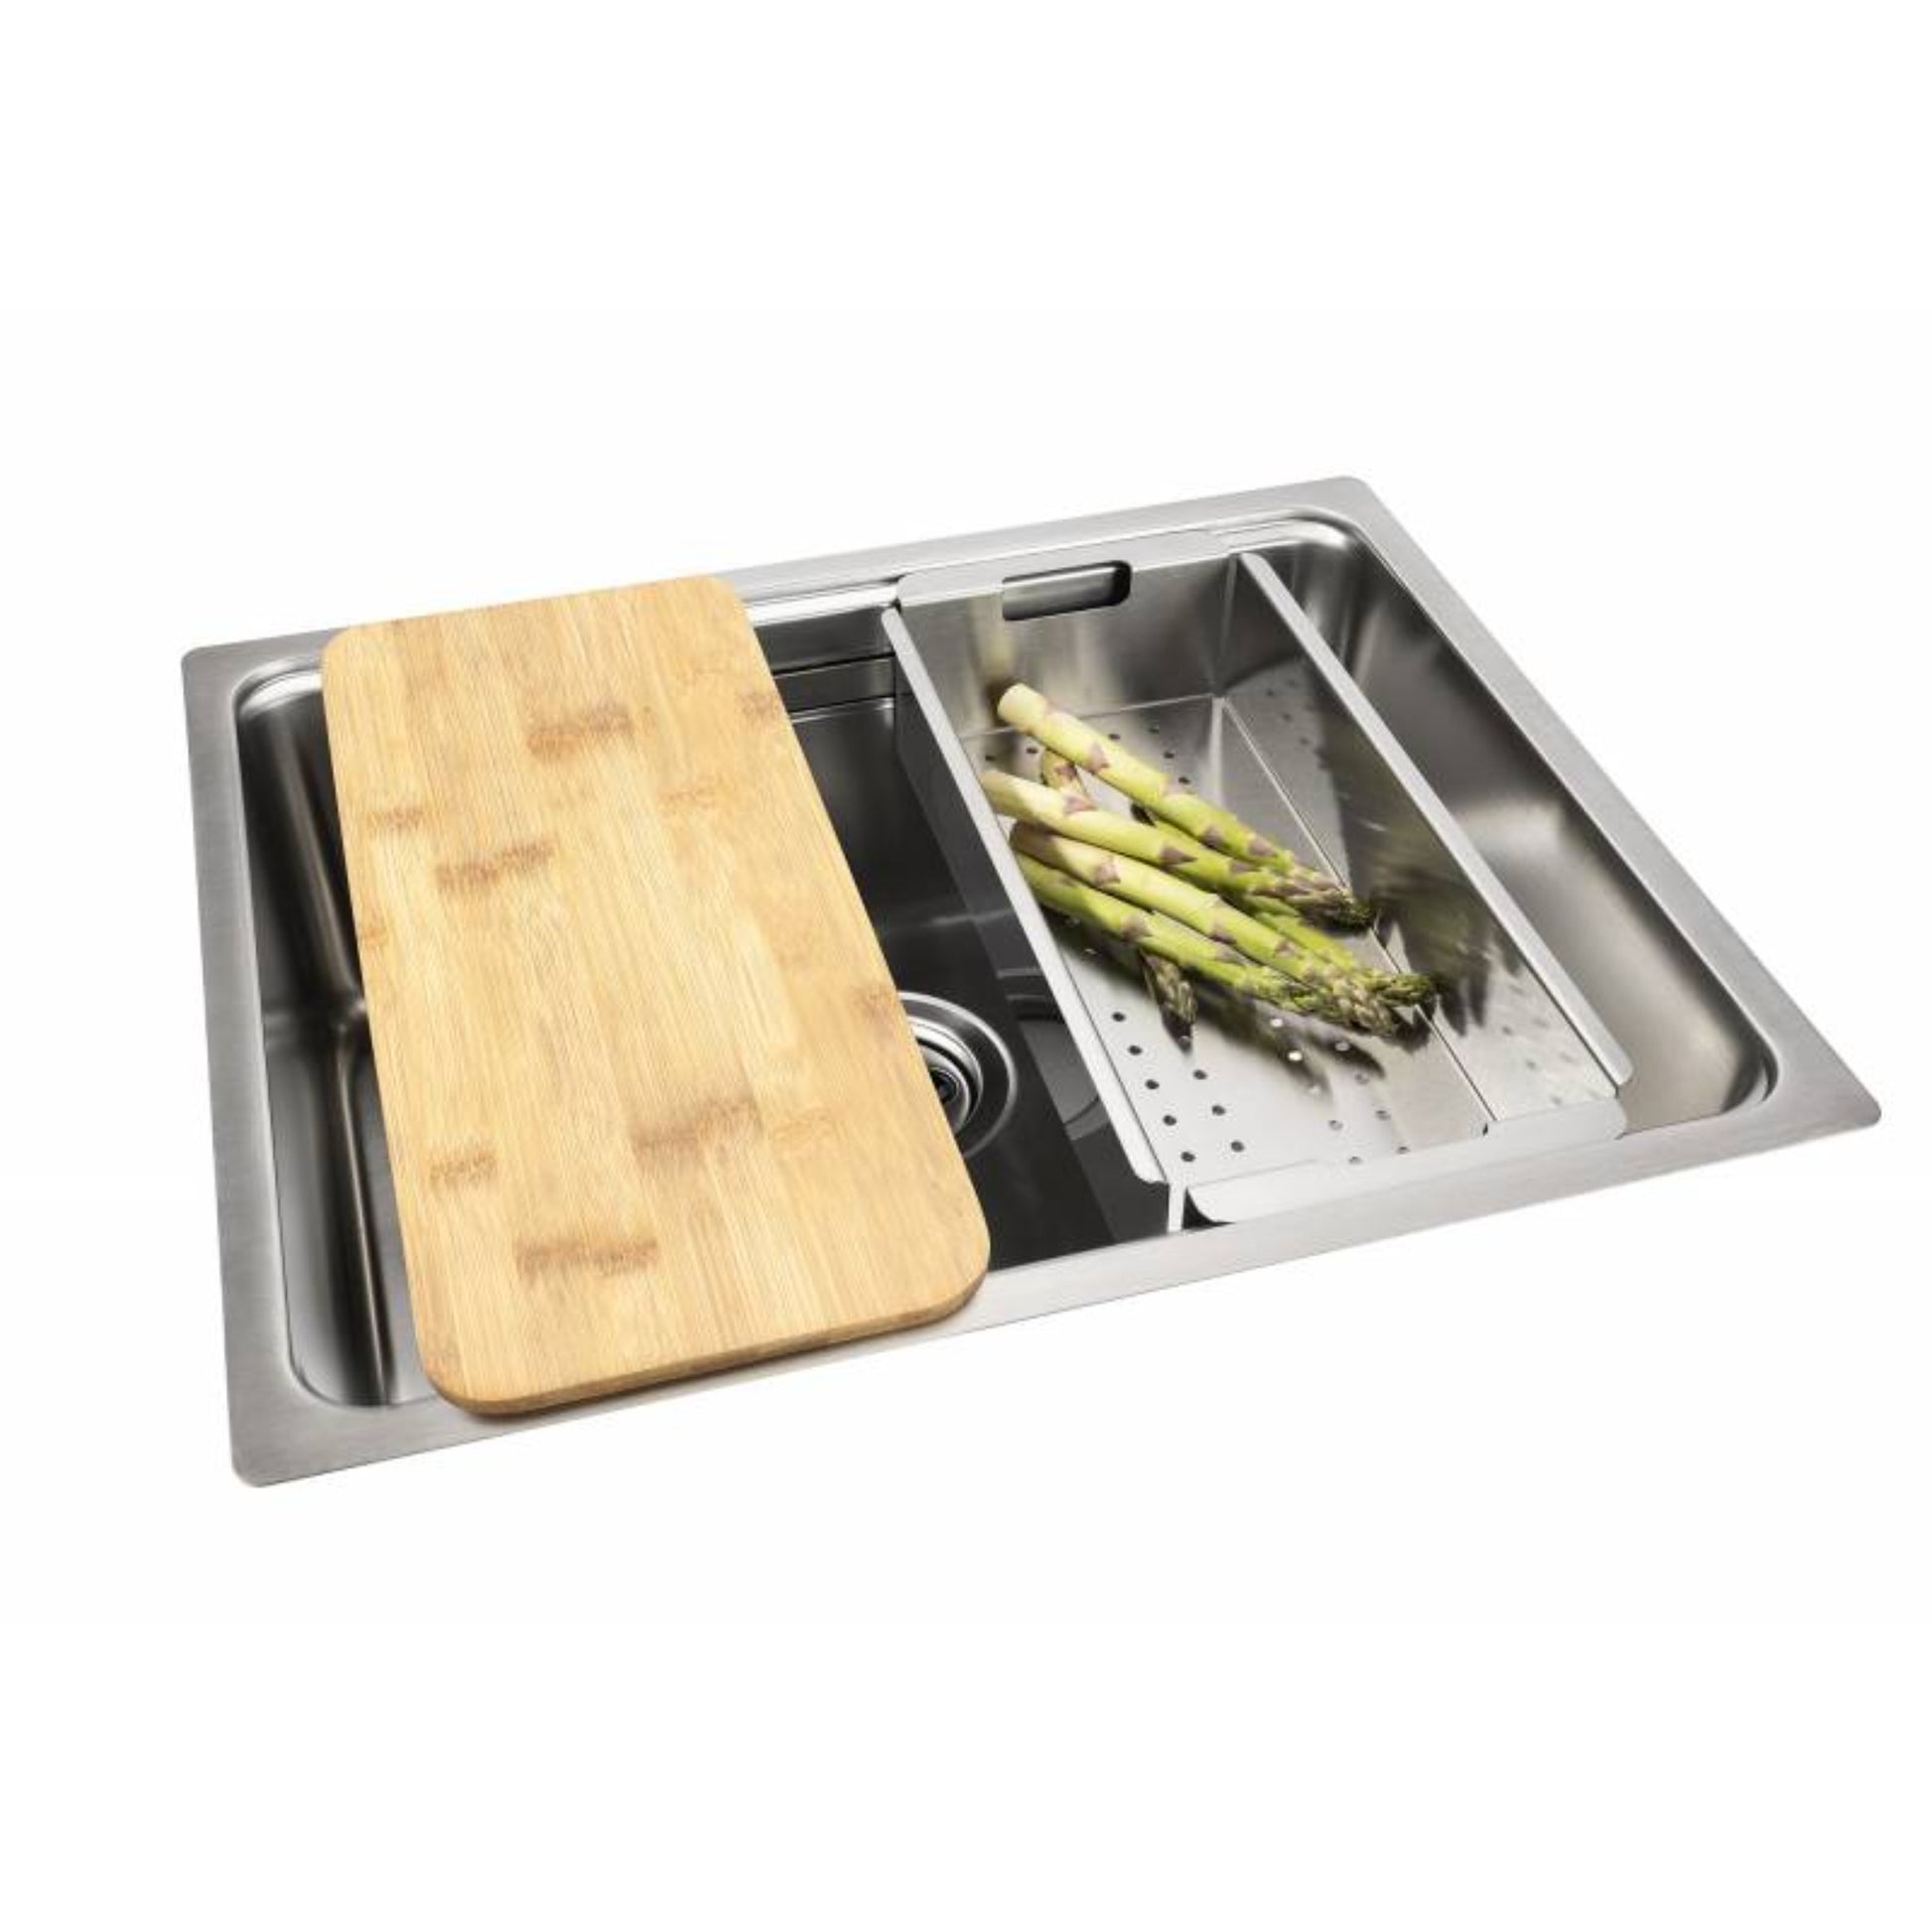 Abode Sytem Sync Accessory Trio AX1142 displayed on Abode System Sync Kitchen sink